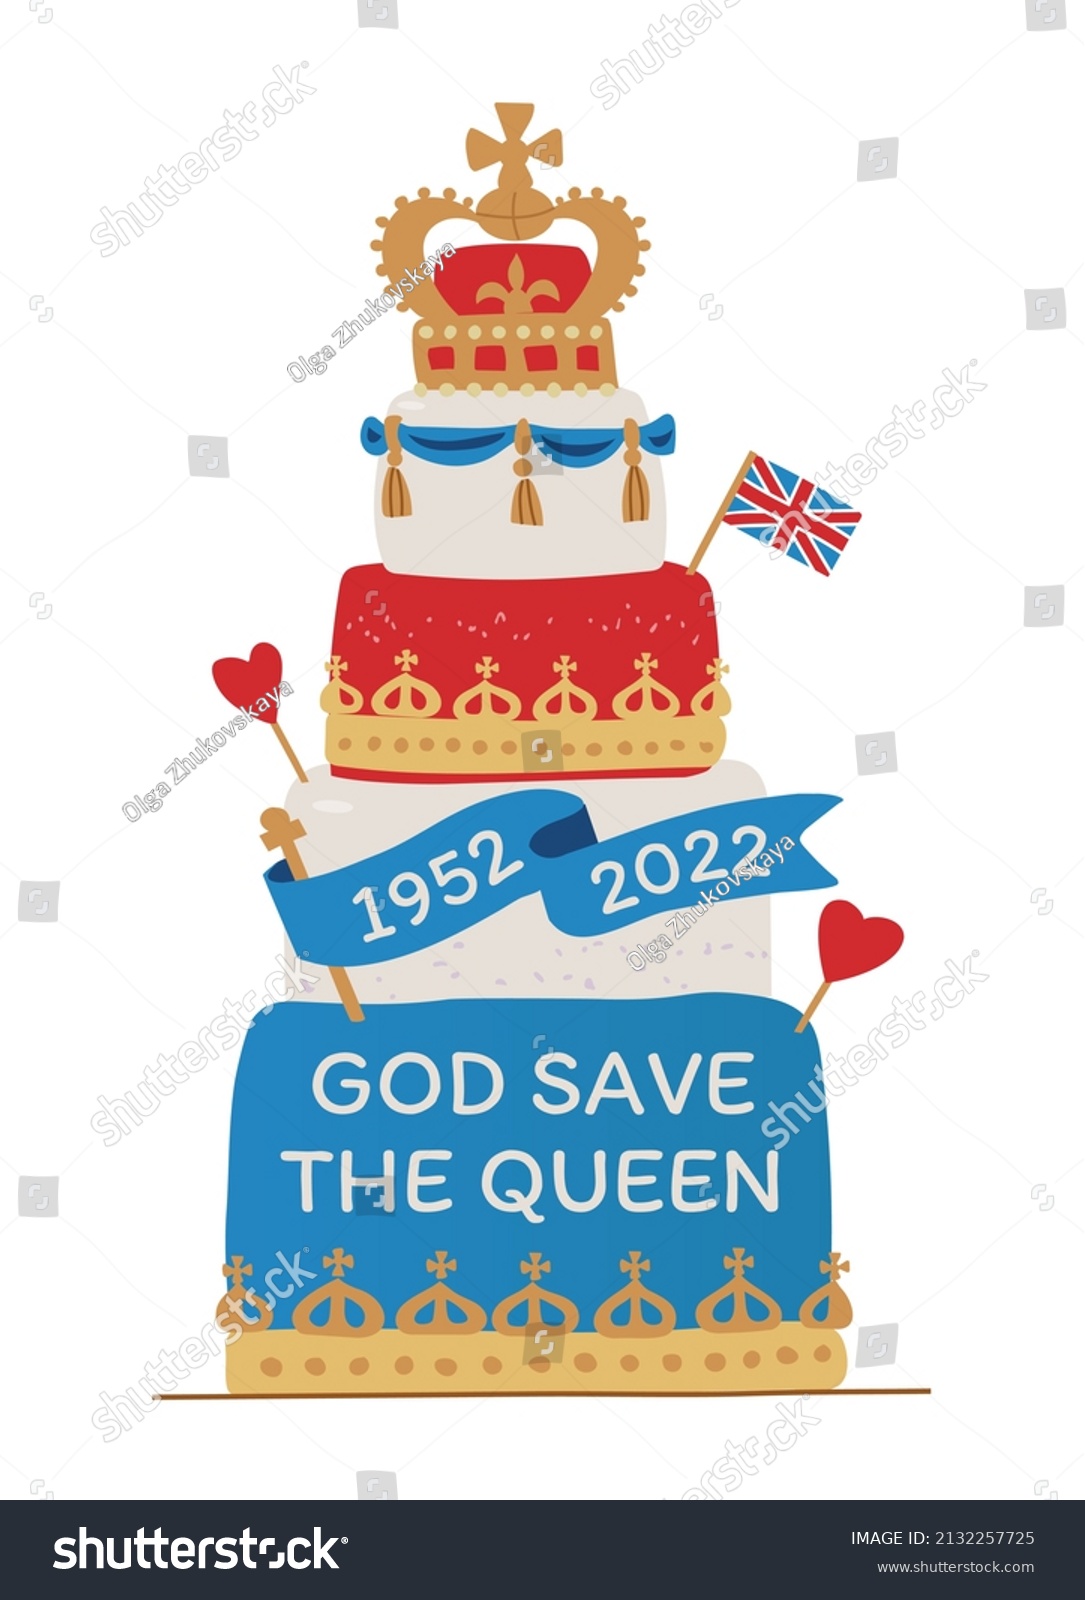 SVG of Cake to Queen jubilee. 'God save the Queen' slogan on cake. British Holiday party cake. Hand drawn color vector illustration. svg